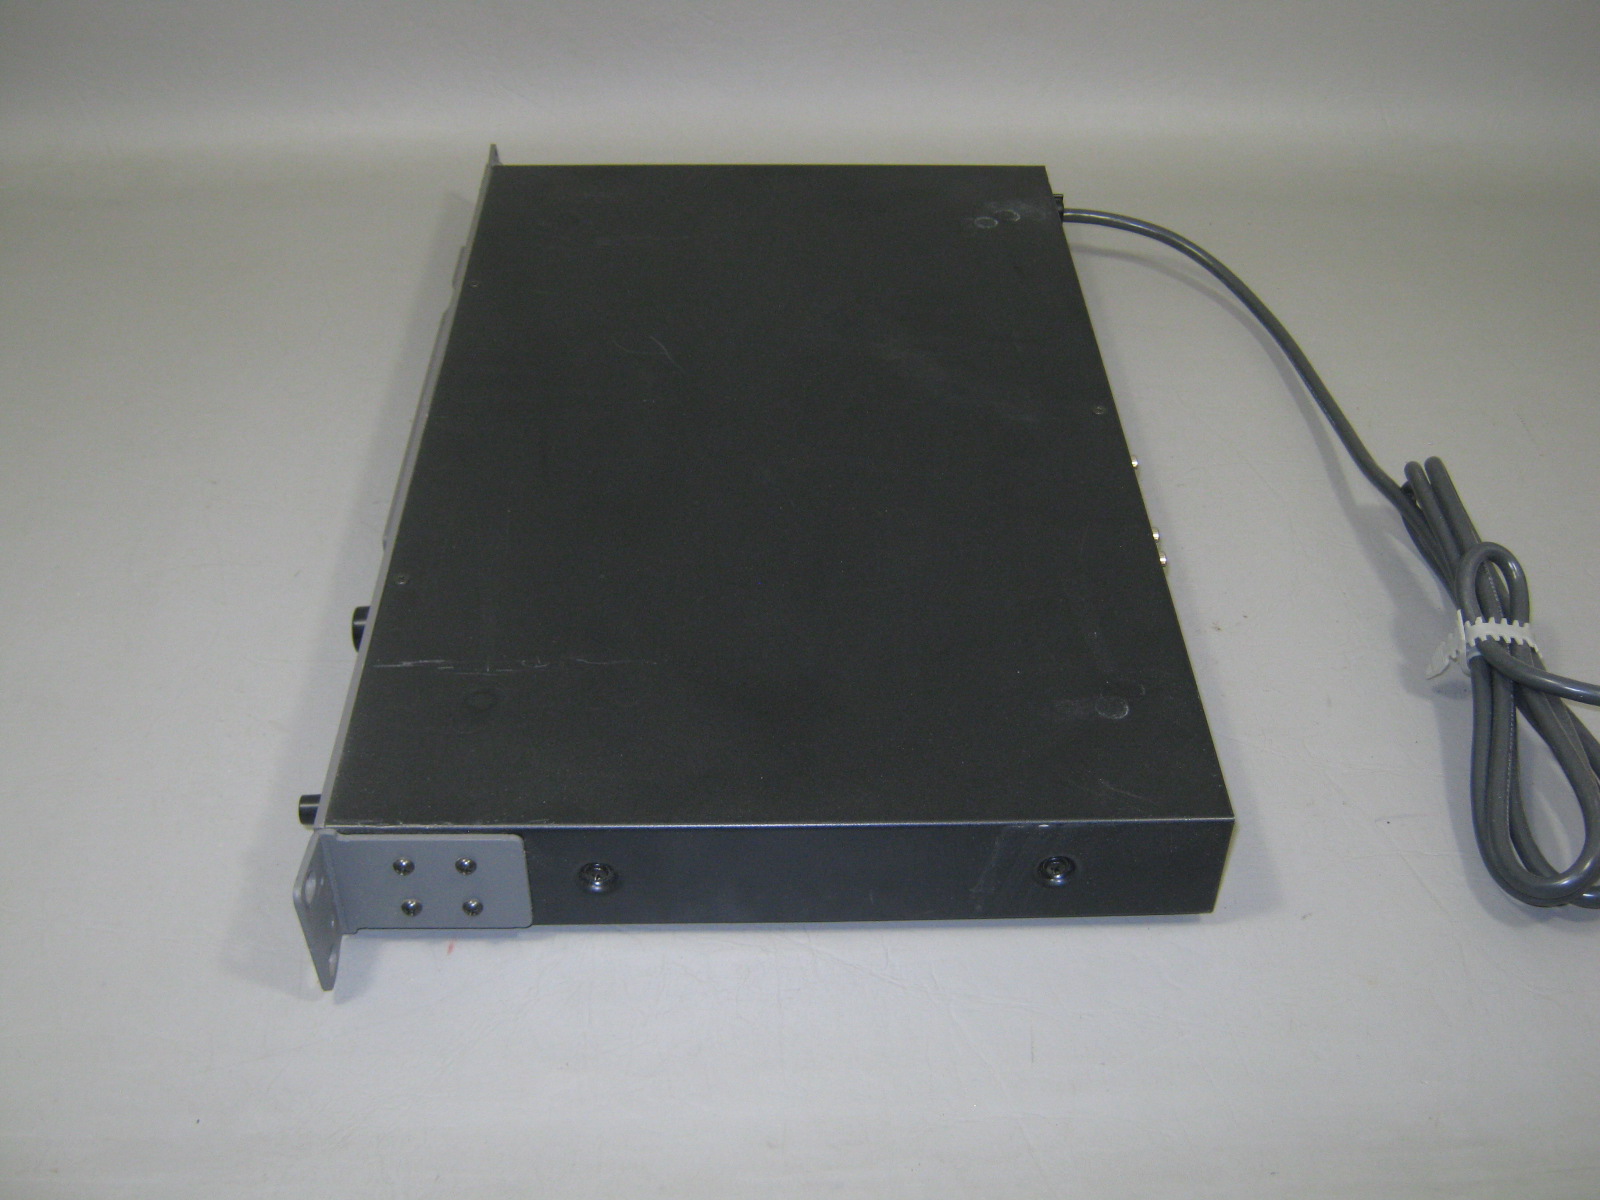 Sony MDS-E10 Professional Rackmount Minidisc MD MDLP Recorder Player Deck Works! 4